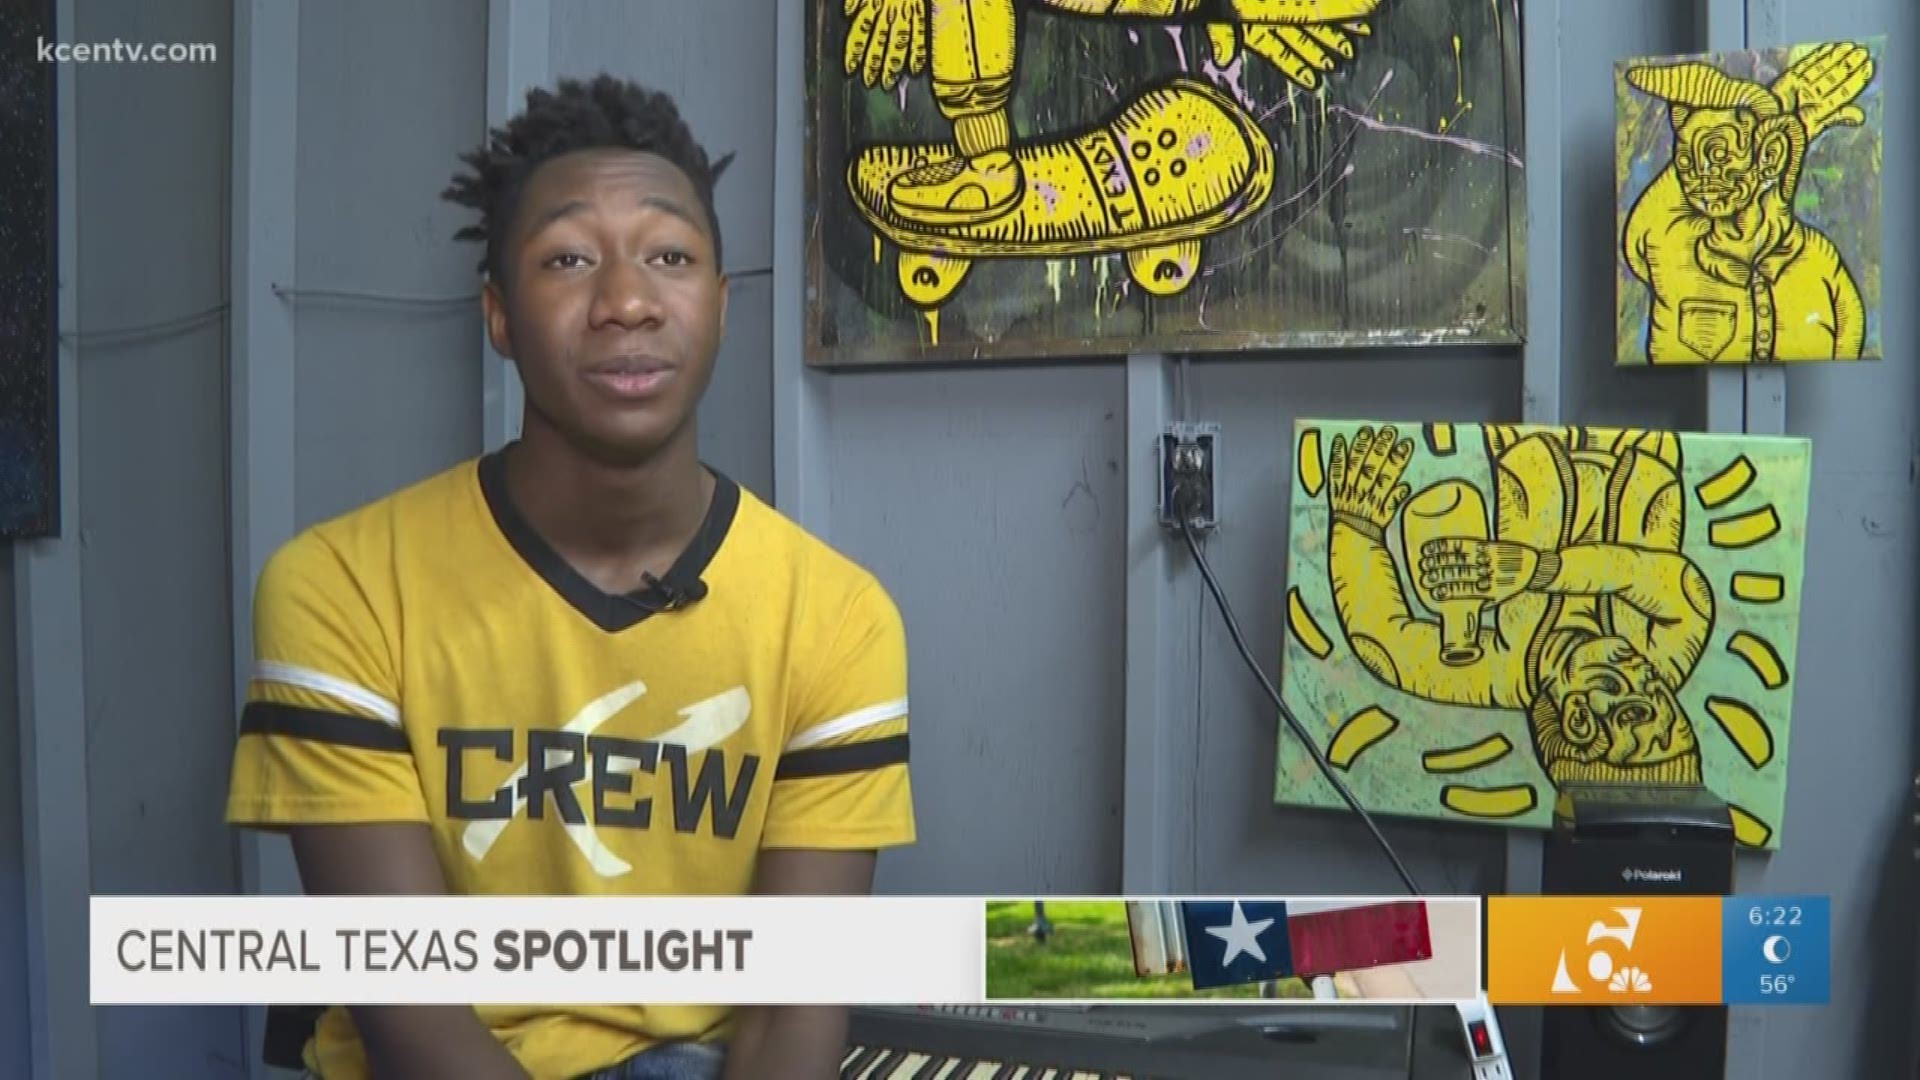 Baylor student Khaki who is a rapper, writer, and entrepreneur, is doing it all! Emani Payne has his story in this week's Central Texas Spotlight.